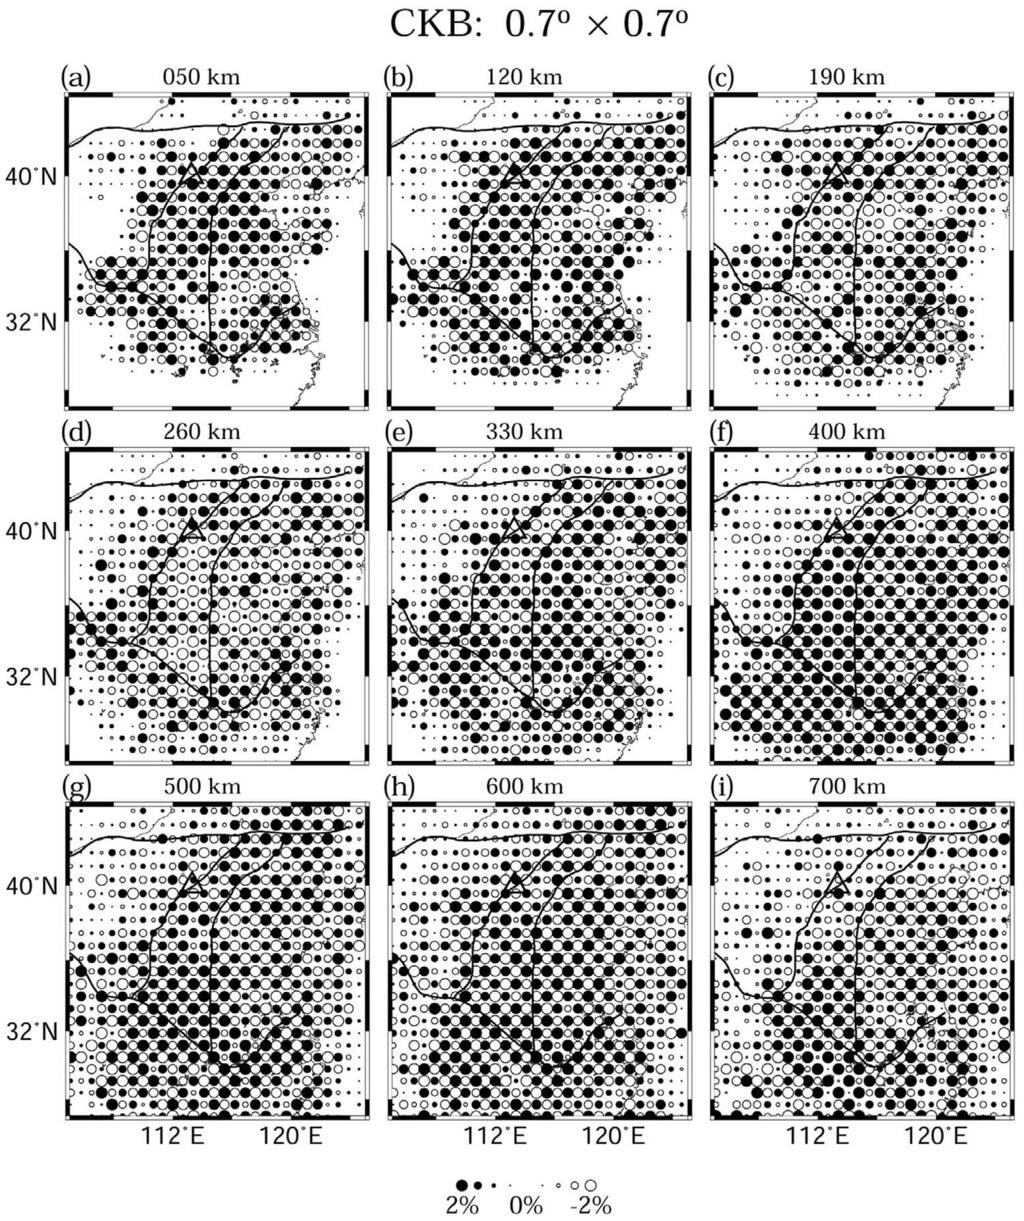 Figure 11. Results of one of the checkerboard resolution tests. Grid spacing is 0.7 0.7 in the horizontal directions. Solid and open circles denote high-v and low-v anomalies, respectively.